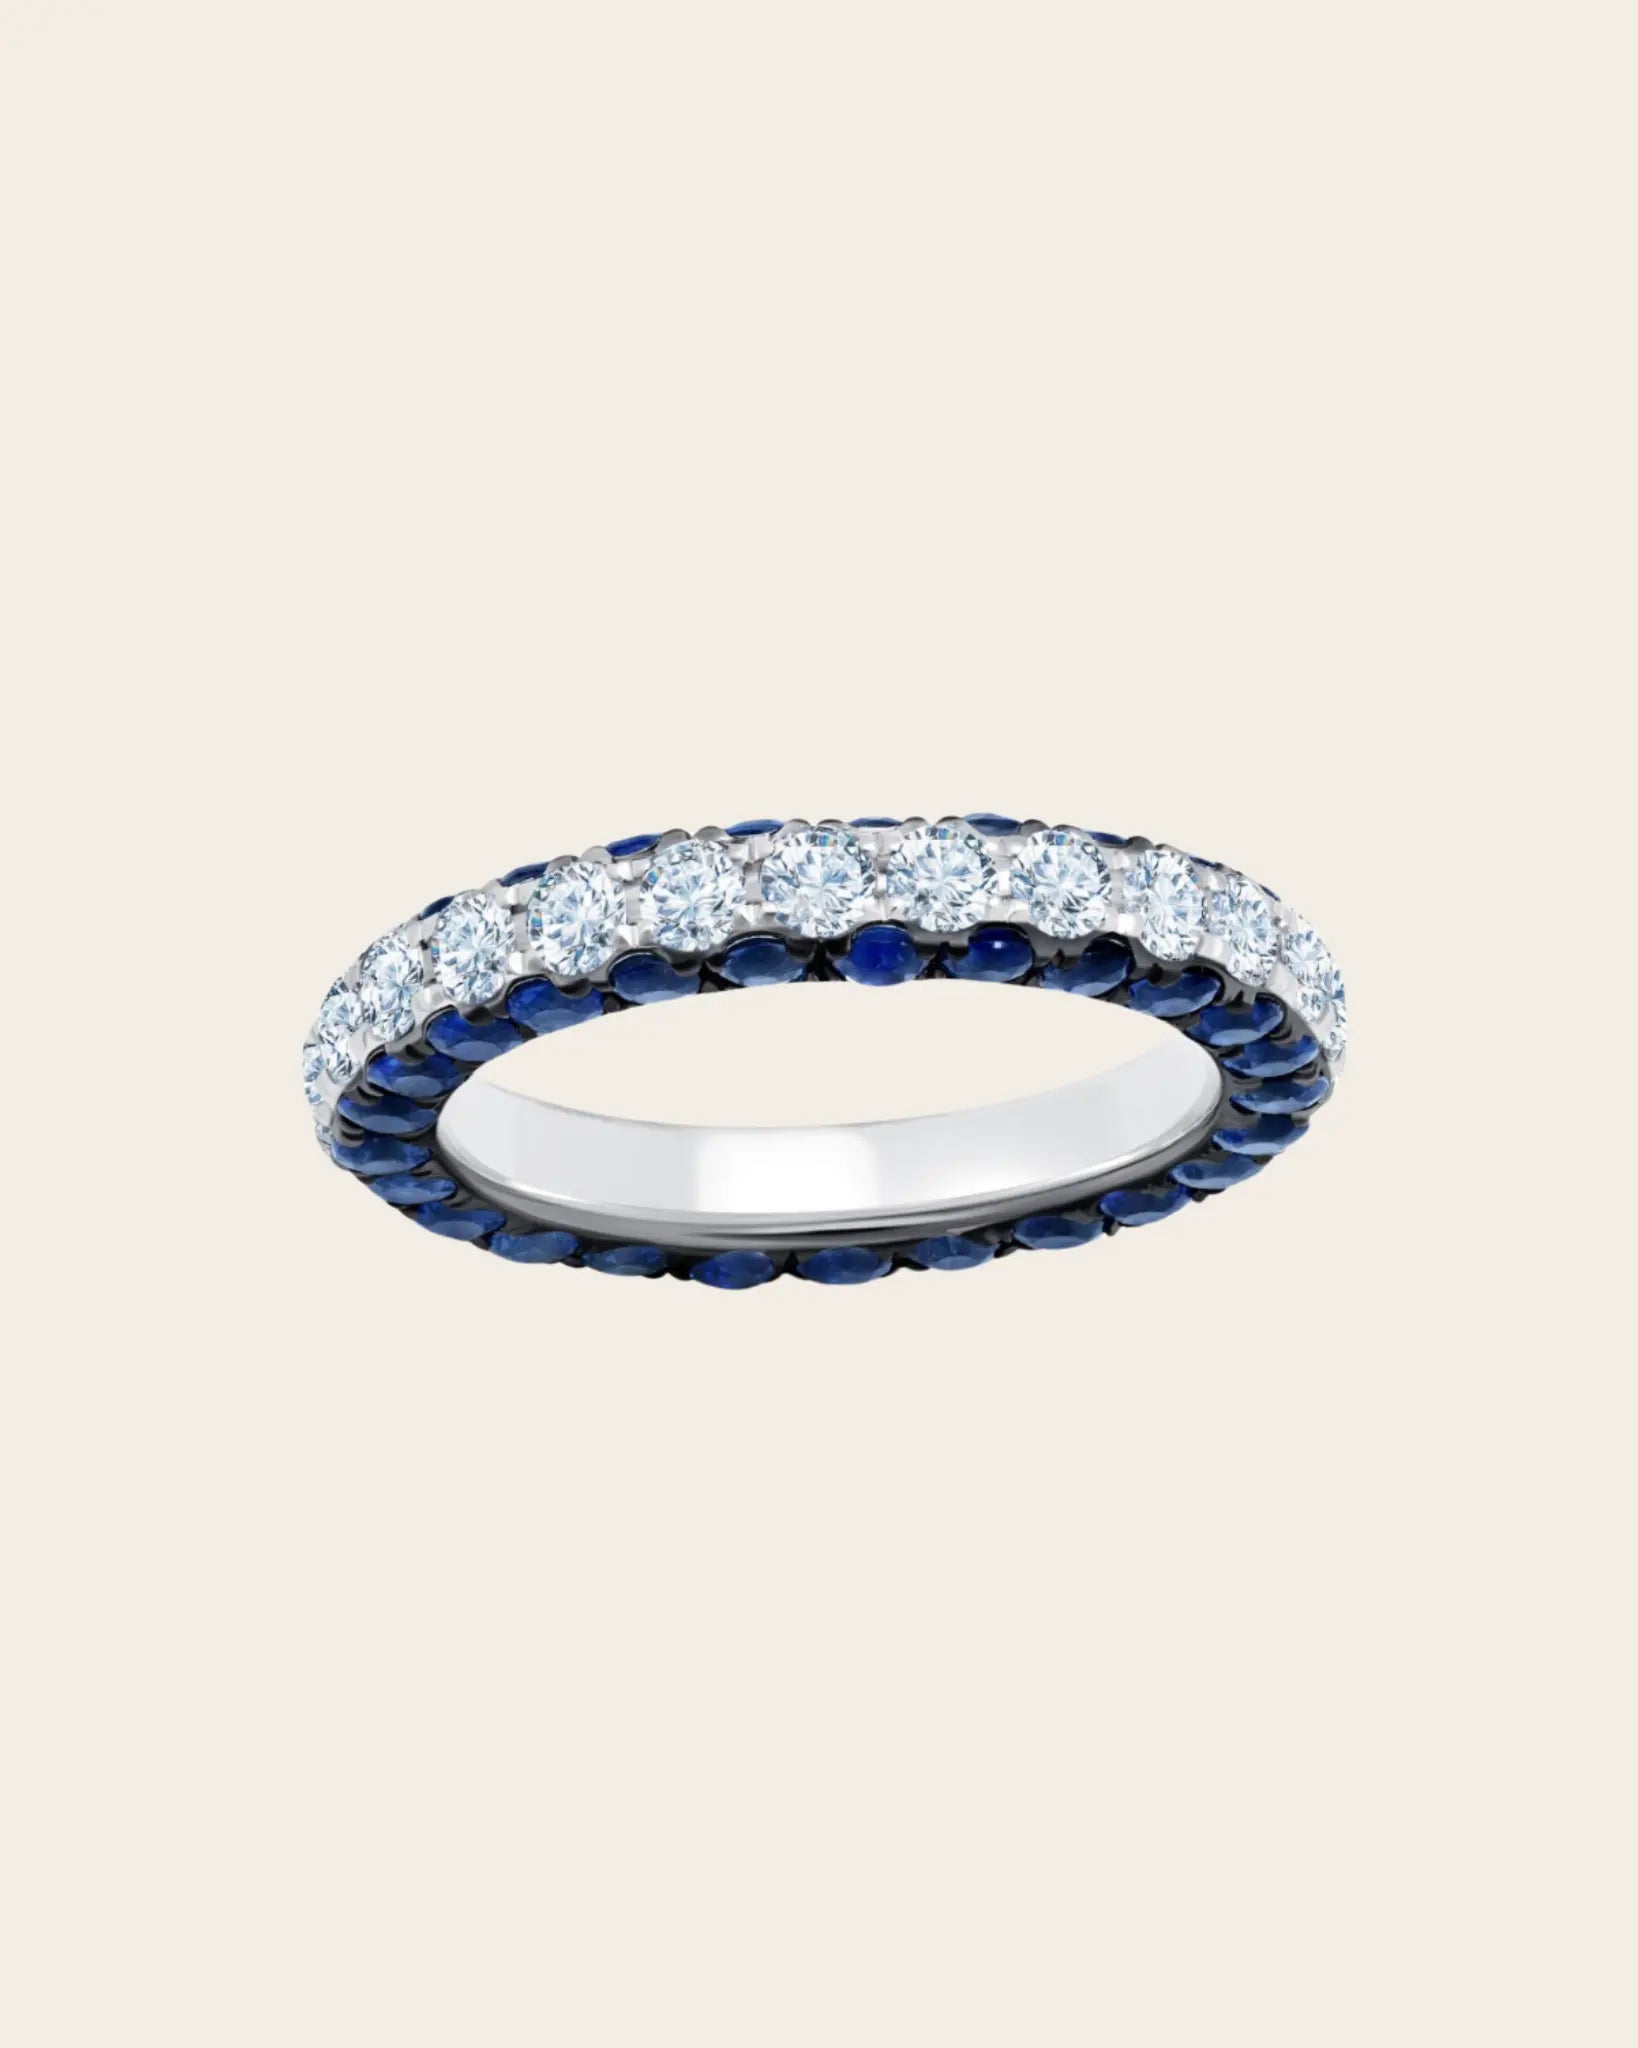 Sapphire & Diamond 3 Sided Band Ring Sapphire & Diamond 3 Sided Band Ring Graziela Gems Graziela Gems  Squash Blossom Vail